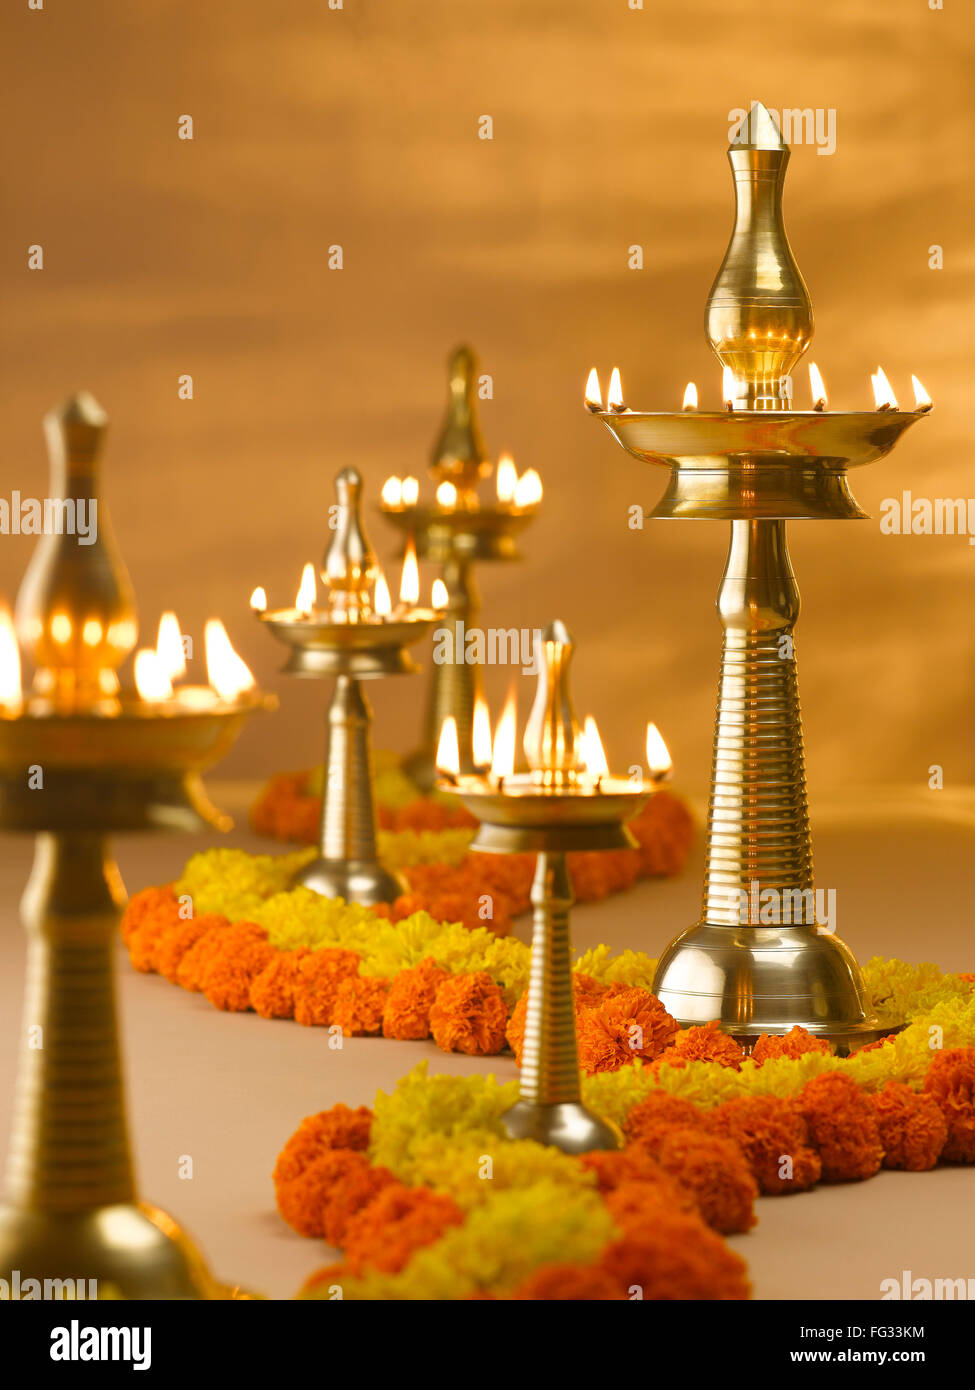 Brass lamps and flowers decoration during diwali festival ; India Stock Photo